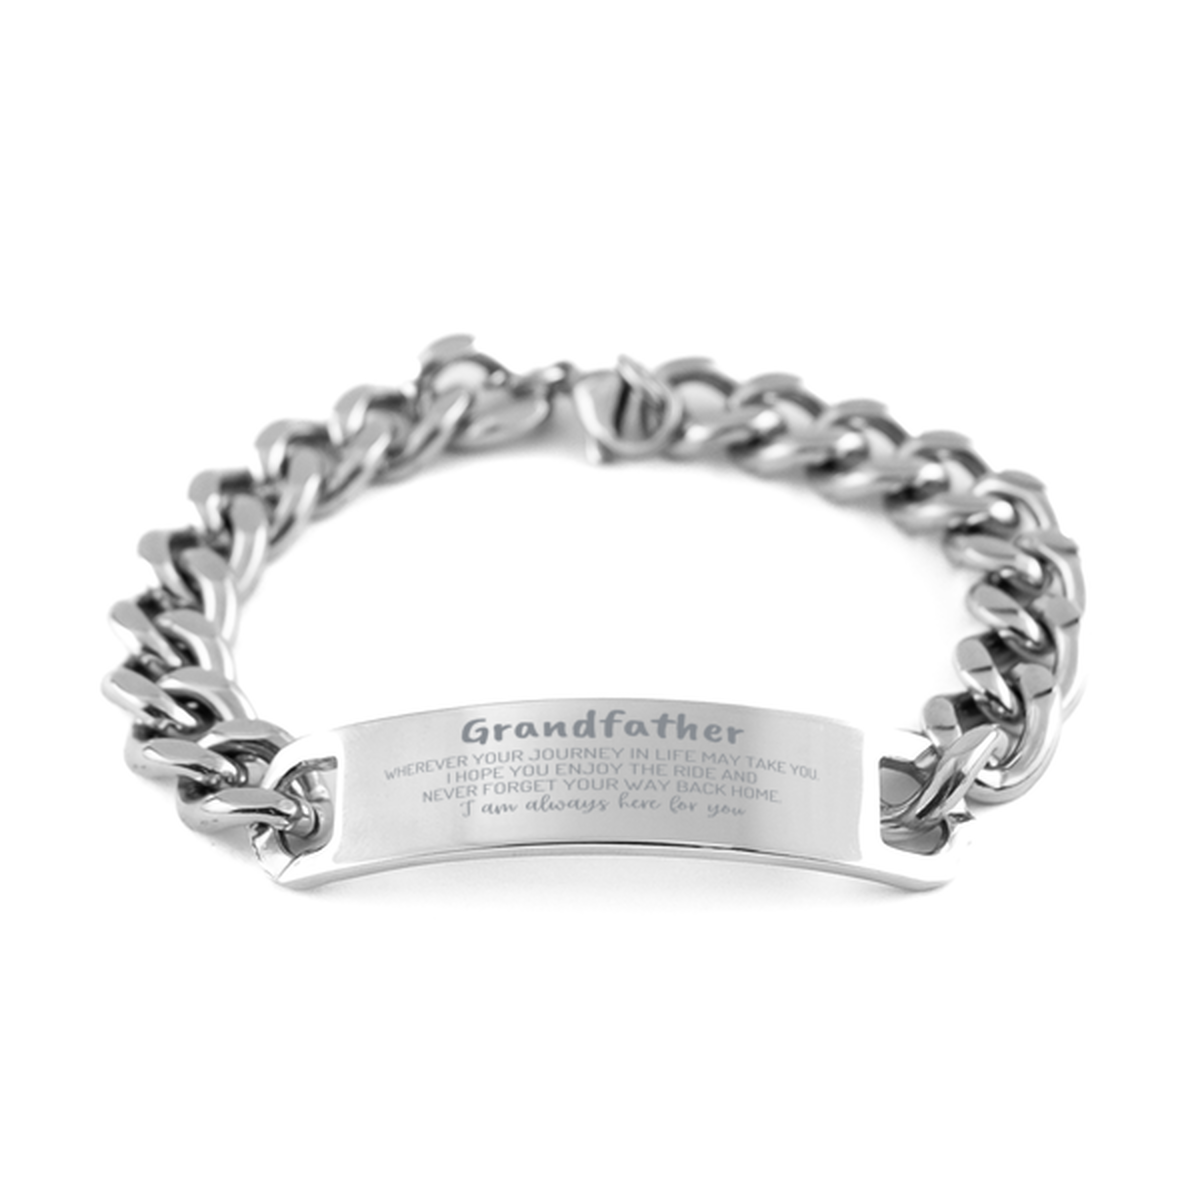 Grandfather wherever your journey in life may take you, I am always here for you Grandfather Cuban Chain Stainless Steel Bracelet, Awesome Christmas Gifts For Grandfather, Grandfather Birthday Gifts for Men Women Family Loved One